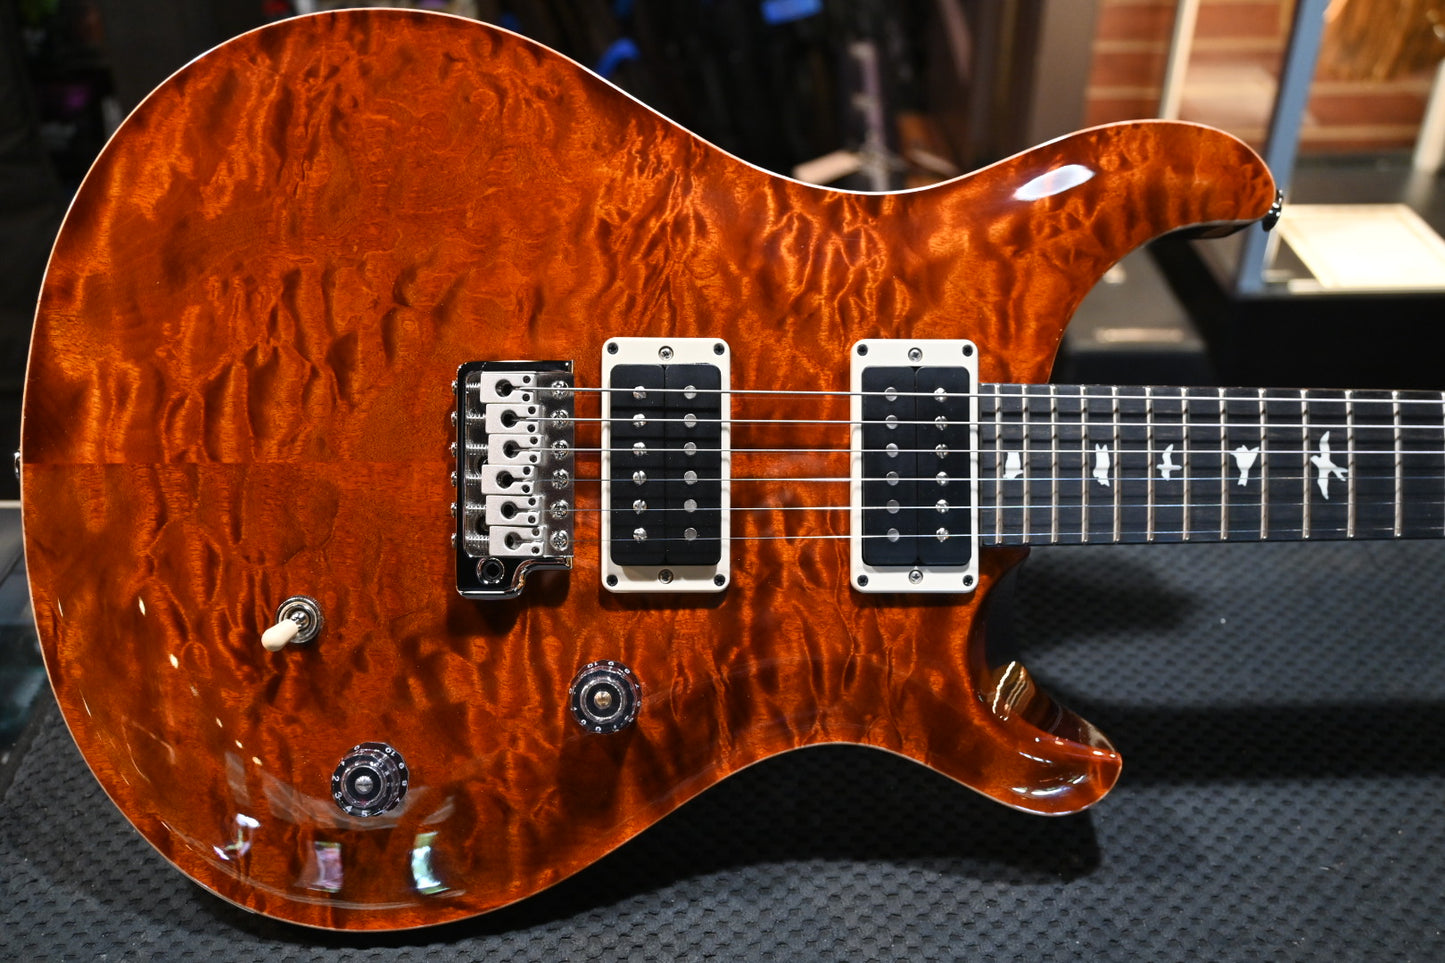 PRS Wood Library CE 24 Quilt - Tortoise Shell Guitar #8384 - Danville Music